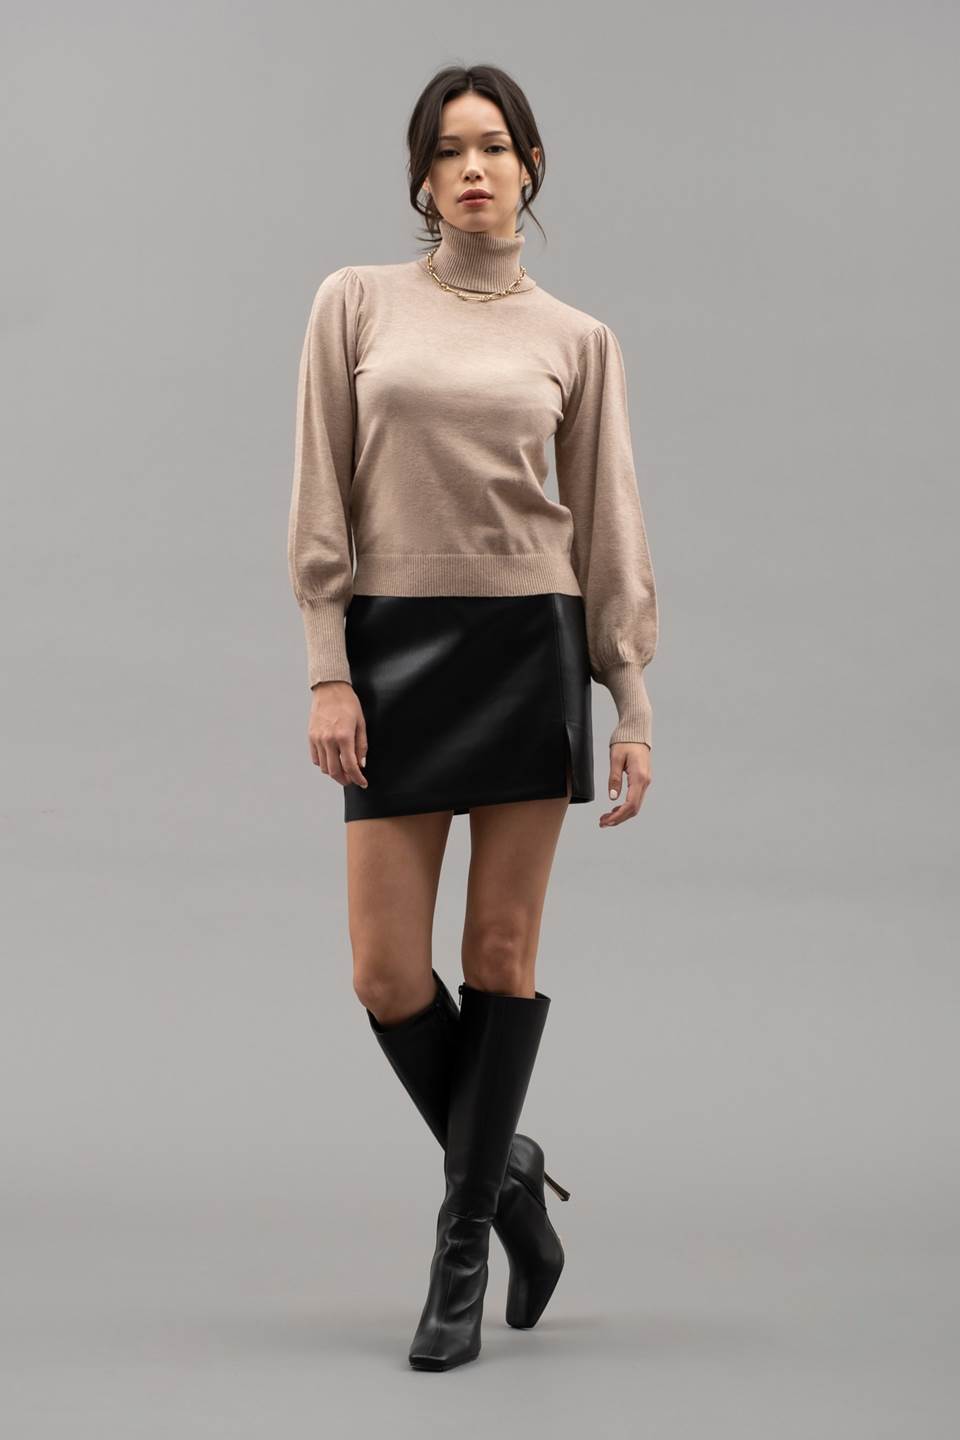 SOLID HIGH TURTLE NECK KNIT TOP (PRE-ORDER)